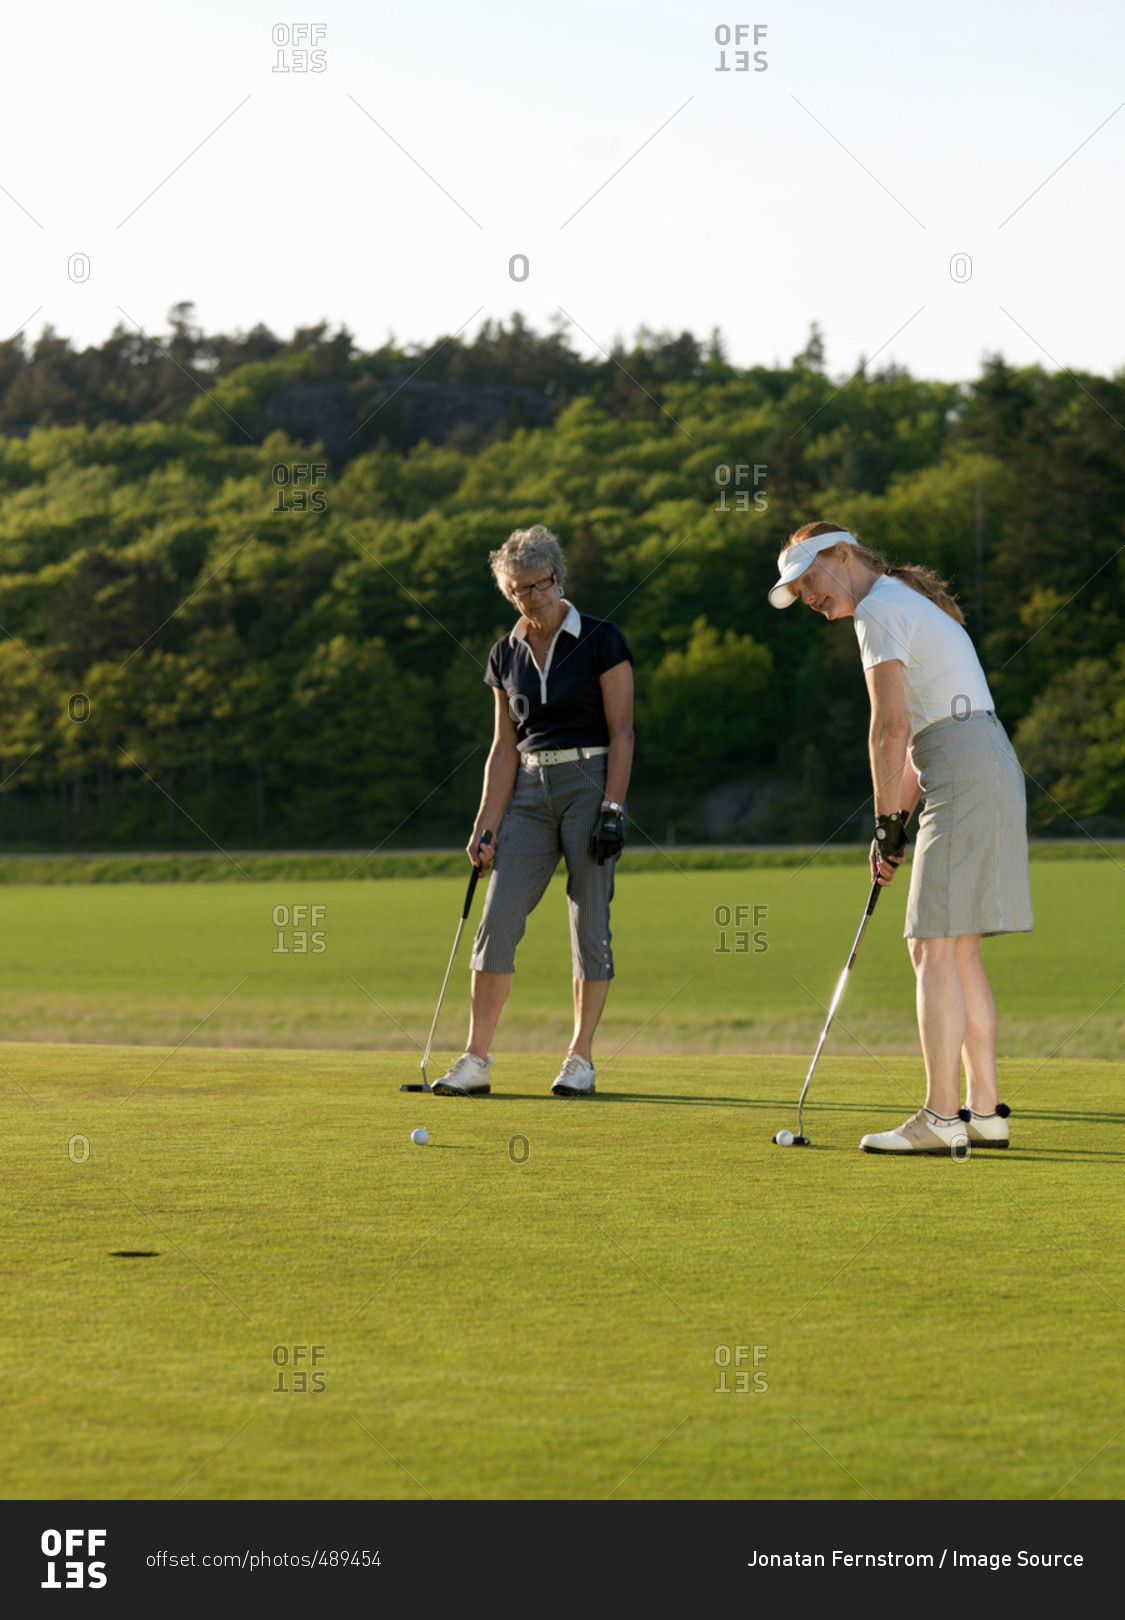 Two women at golf green